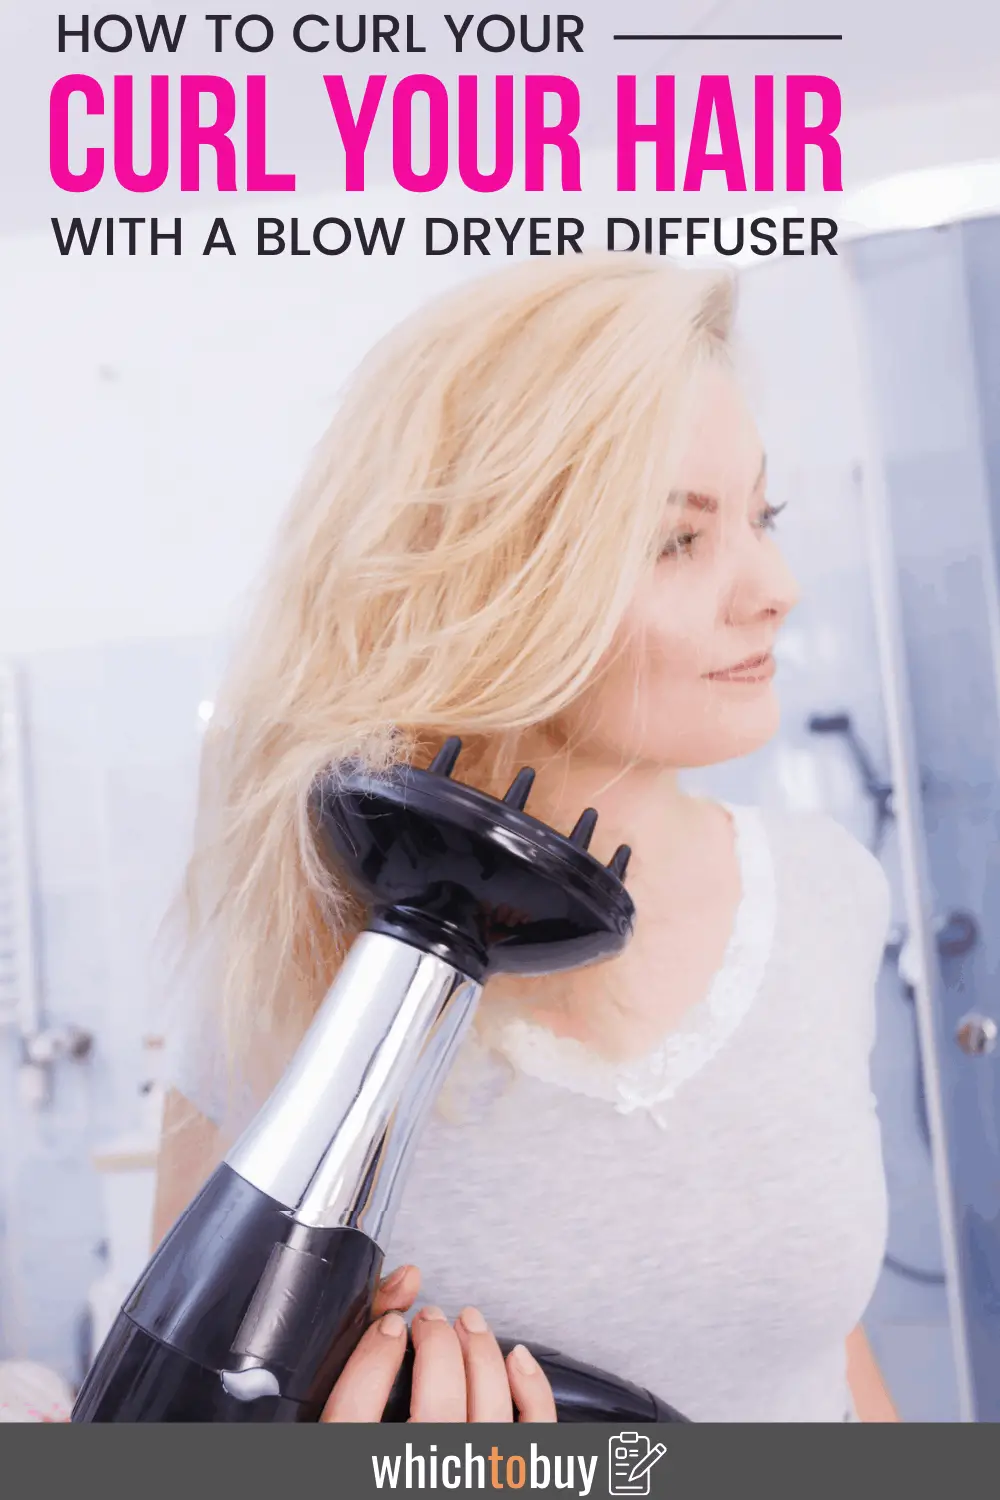 How to Curl Your Hair With a Blow Dryer Diffuser 6 Steps